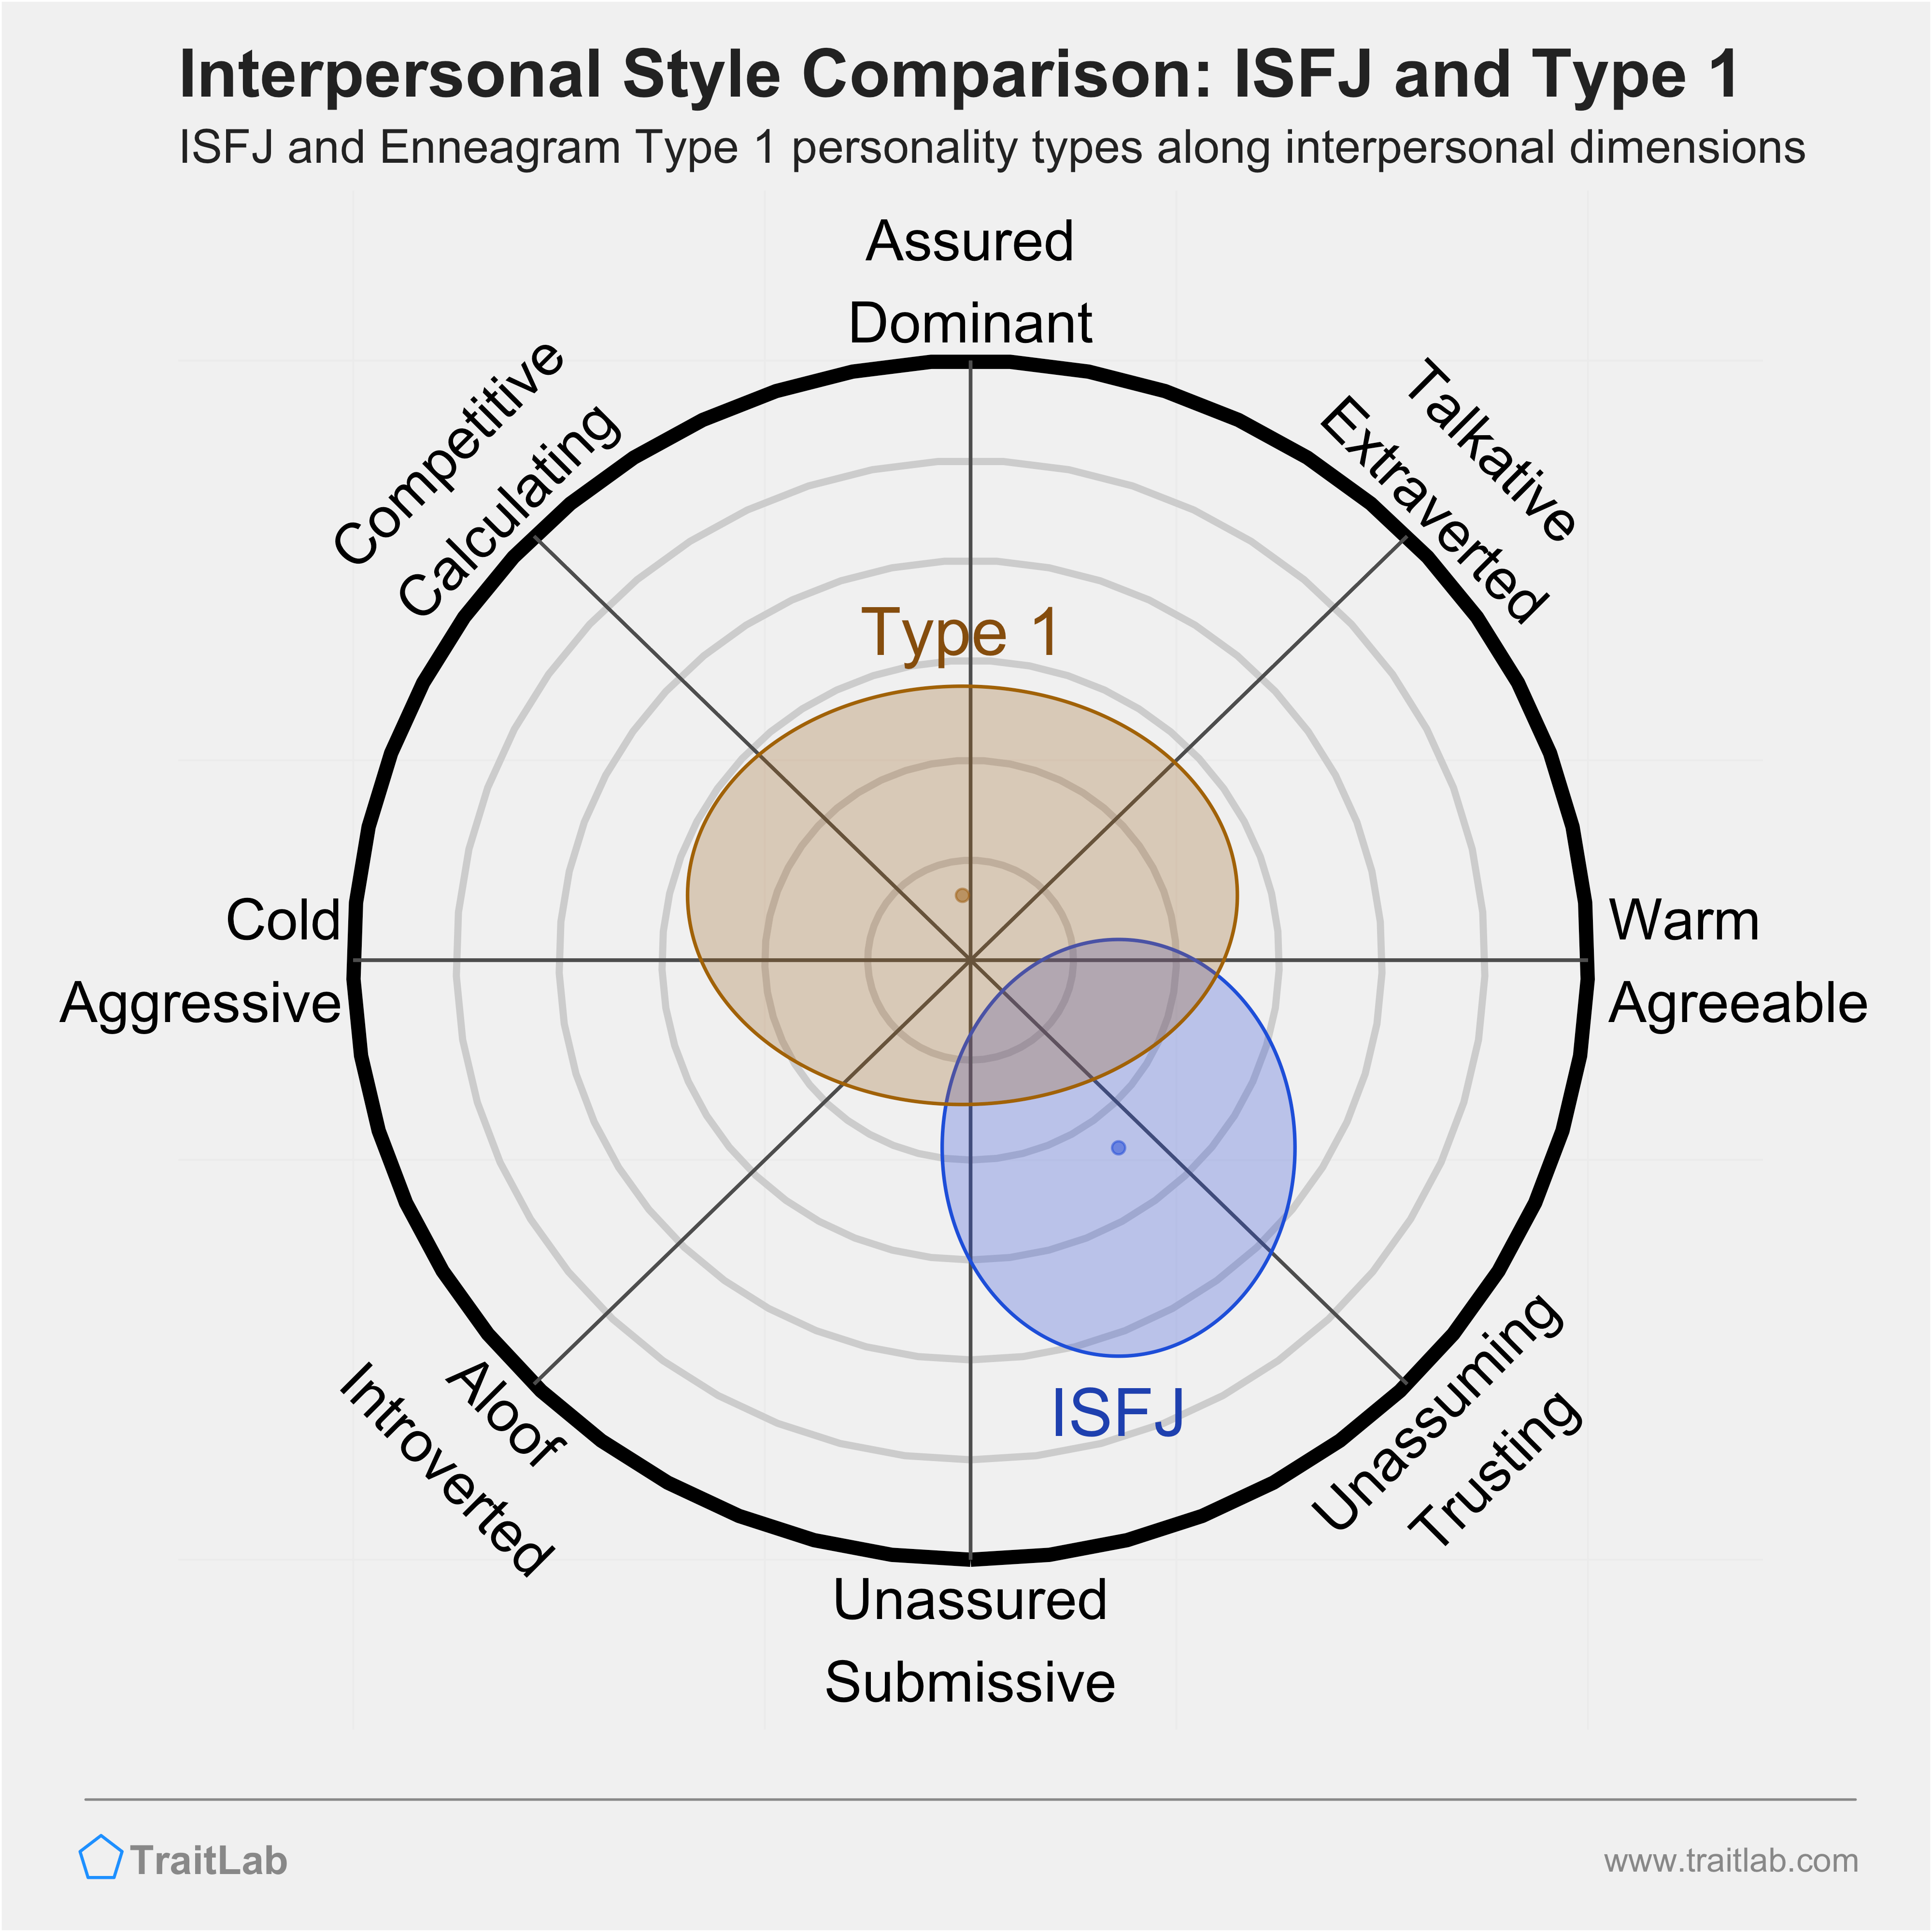 Enneagram ISFJ and Type 1 comparison across interpersonal dimensions